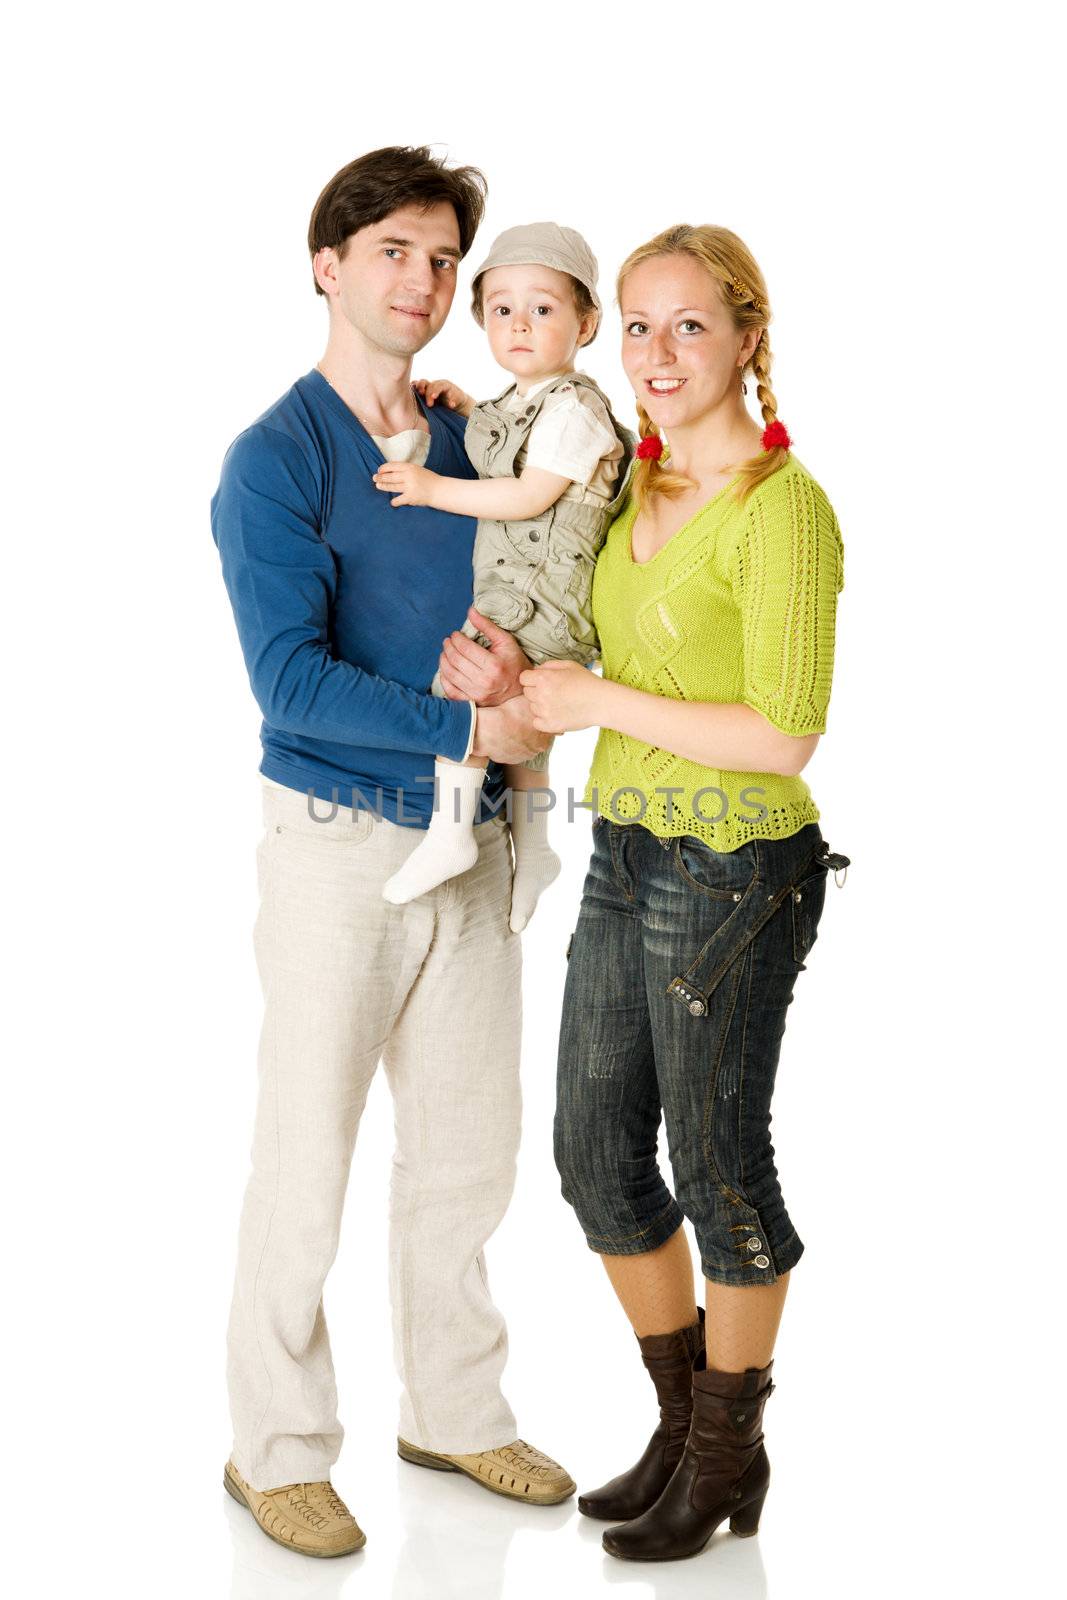 Happy Family with kid together isolated on white